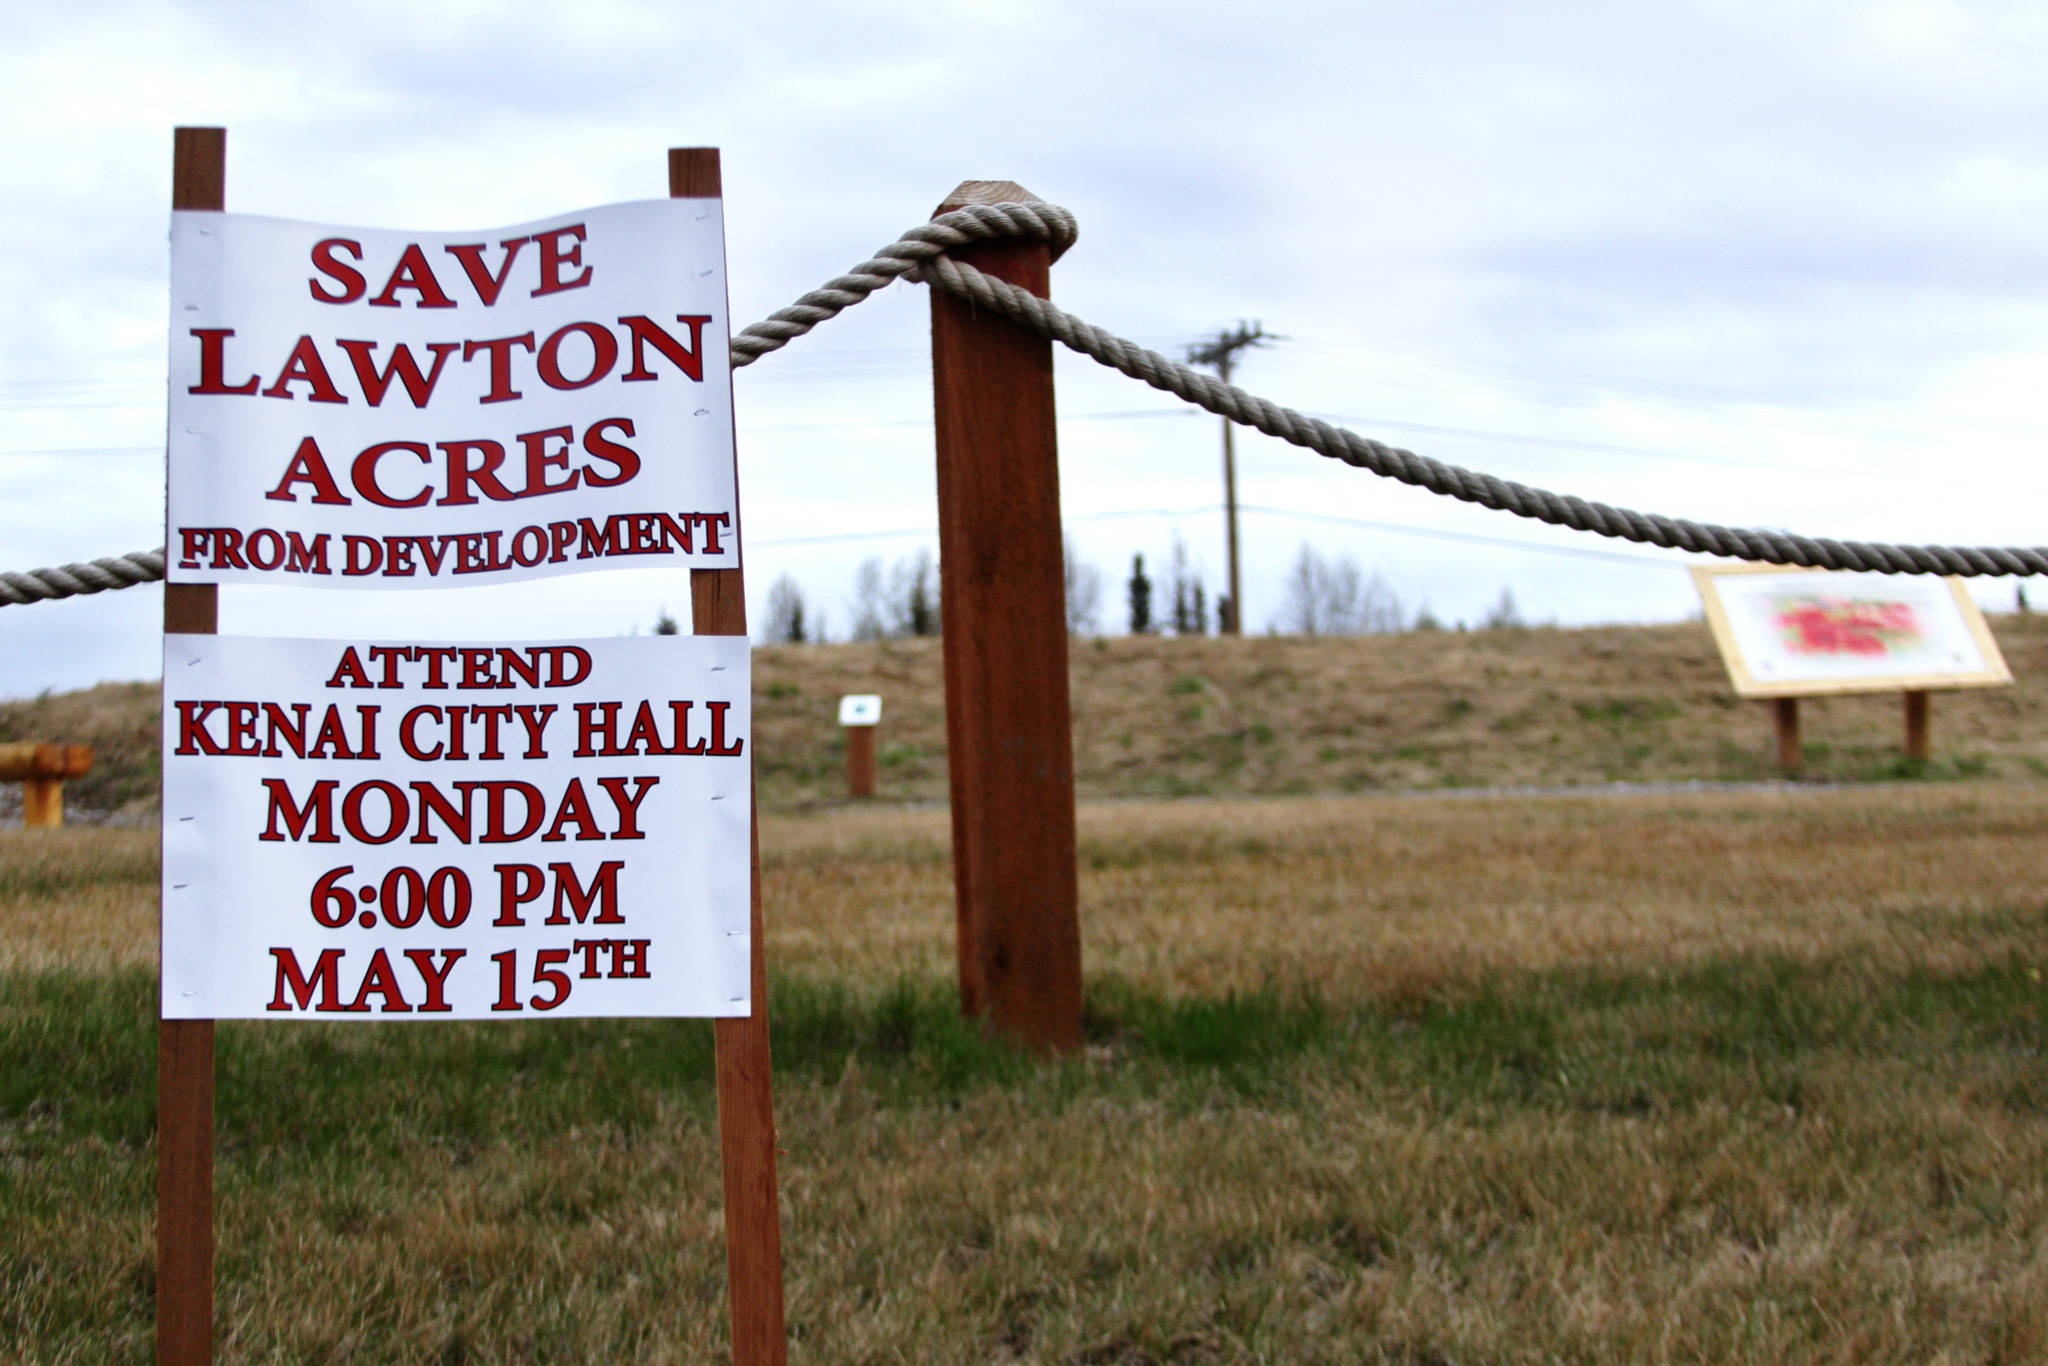 A sign posted near the Kenai Field of Flowers by activist and nieghborhood resident Greg Daniels urges property-owners near Lawton Acres — a 16.5-acre wooded strip of city-owned land that has been the subject of controversial development efforts — to attend a past Kenai City Council meeting, phographed on May 12, 2017 in Kenai, Alaska. The Kenai City Council may vote on June 21 or July 5 on whether to preserve Lawton Acres as a park by paying to relieve it from the legal obligation to support the Kenai Municipal Airport.